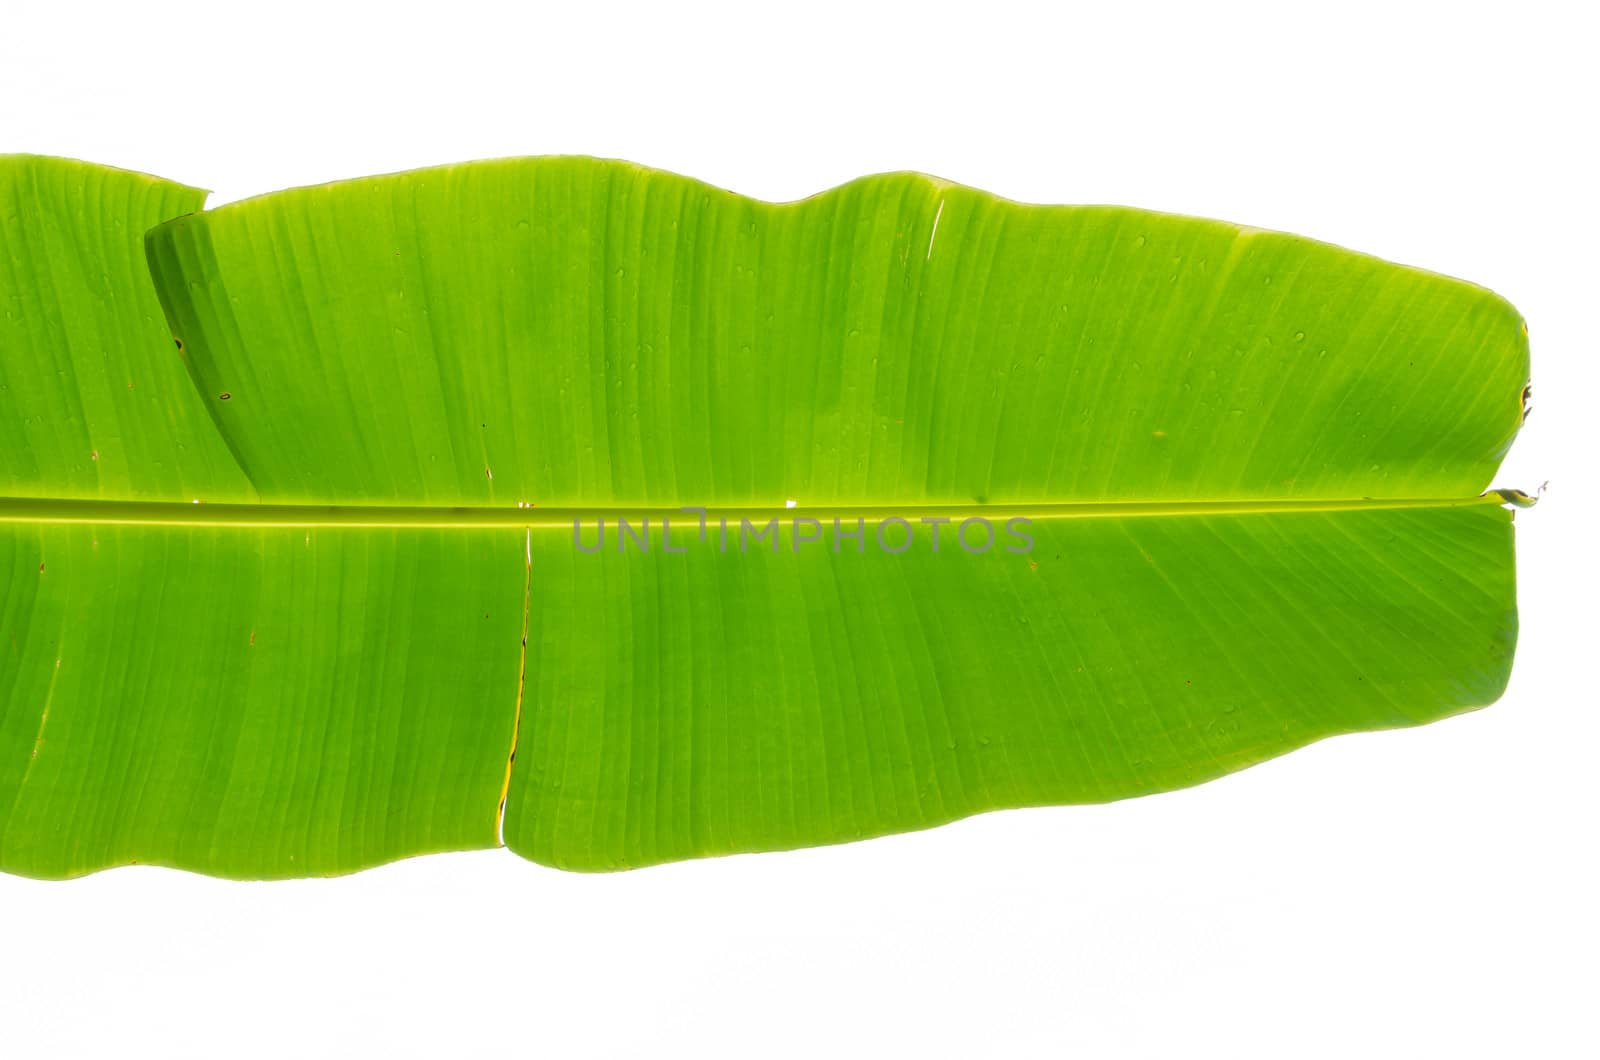 Green banana leaf after rain in the morning